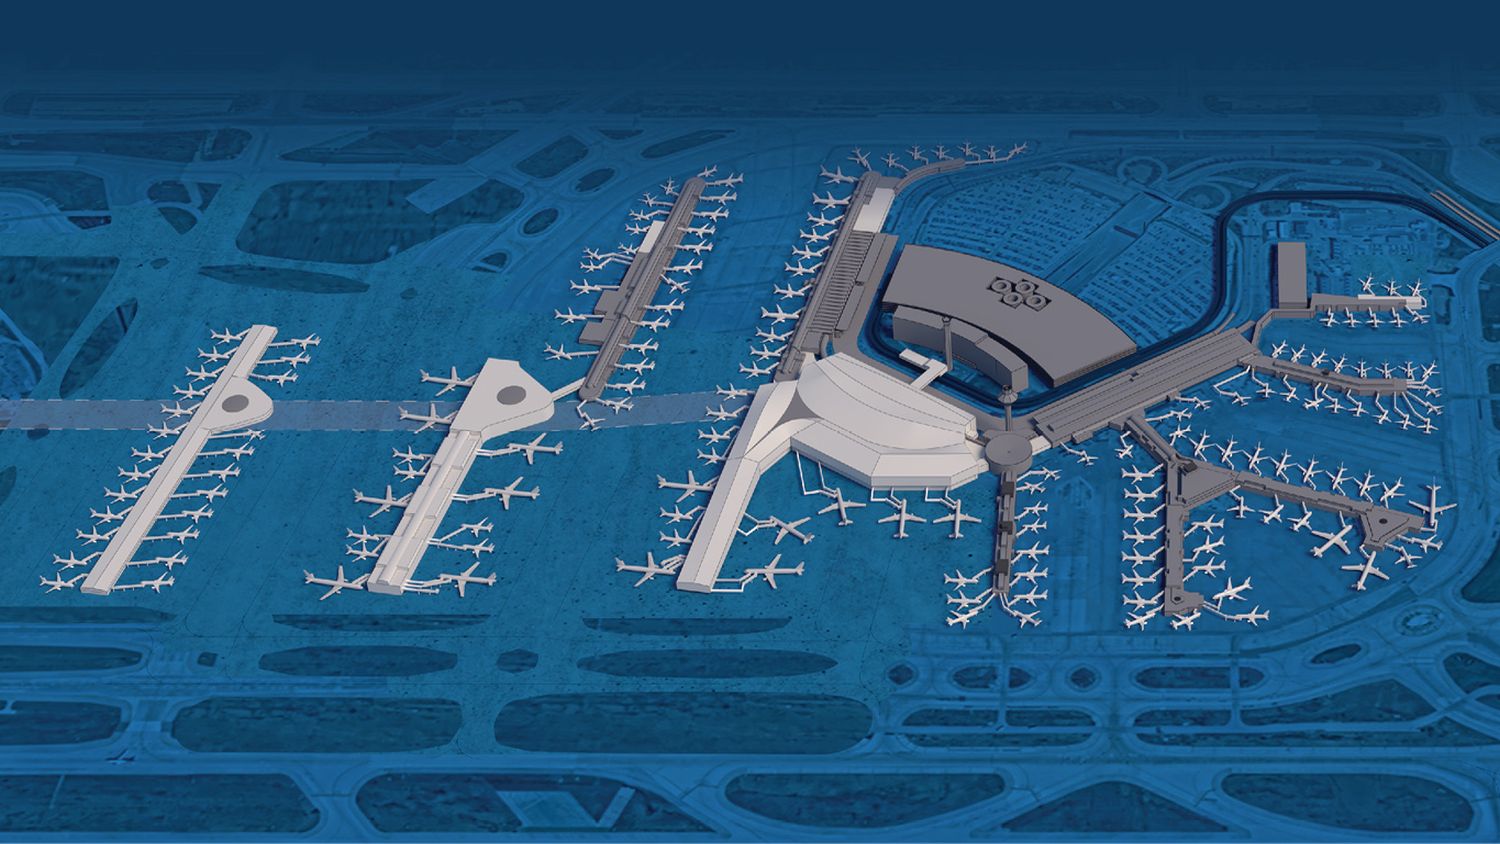 Preliminary render of new facilities (light coloured) planned for O’Hare International Airport, including two new “satellite” concourses and the O’Hare Global Terminal (Chicago Department of Aviation/www.ord21.com)